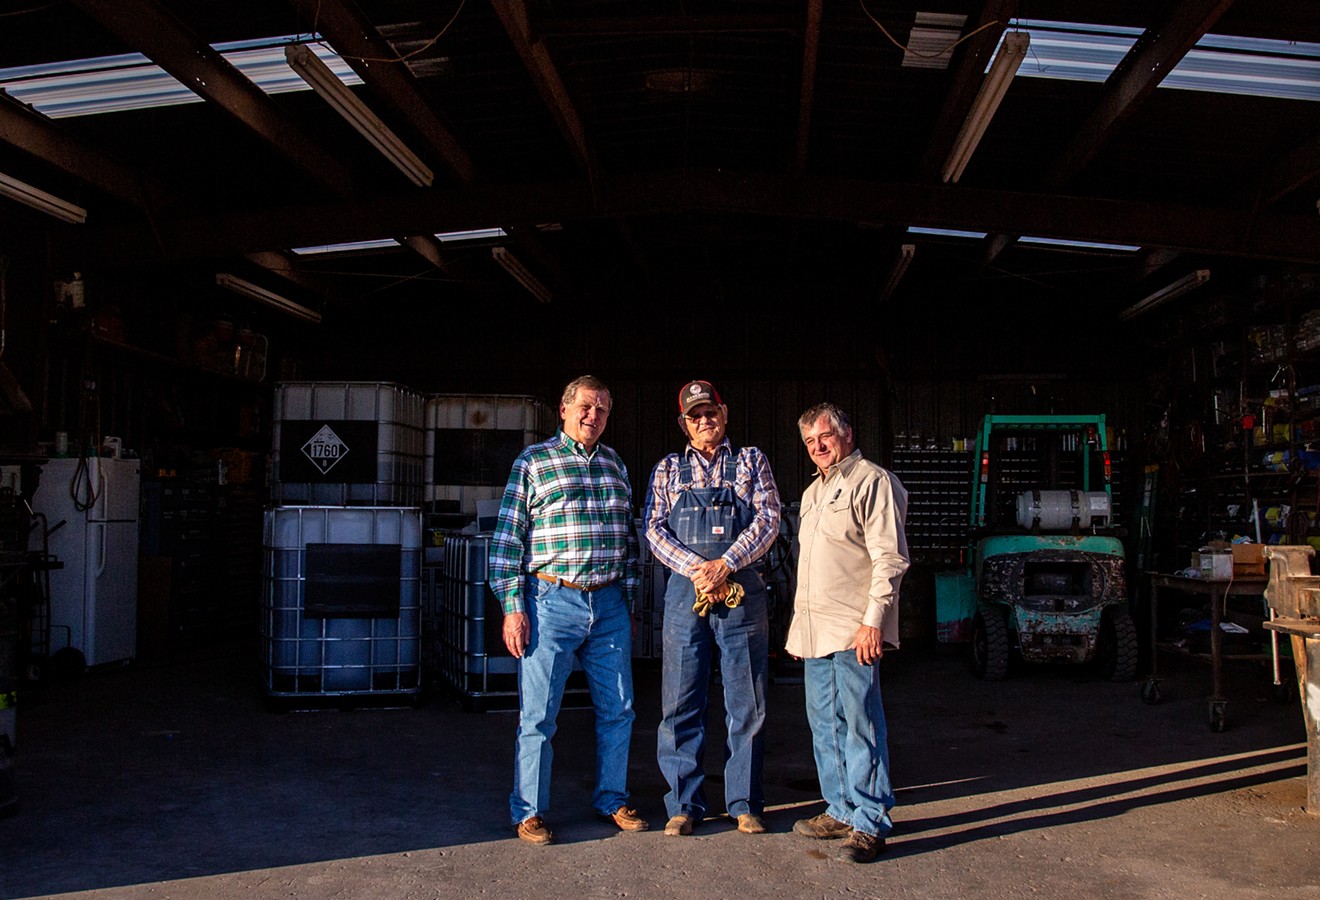 Barry Mahler, Larry McAlister and Kenneth McAlister tell tales of the wild ups and downs of farming in Larry McAlister’s garage.